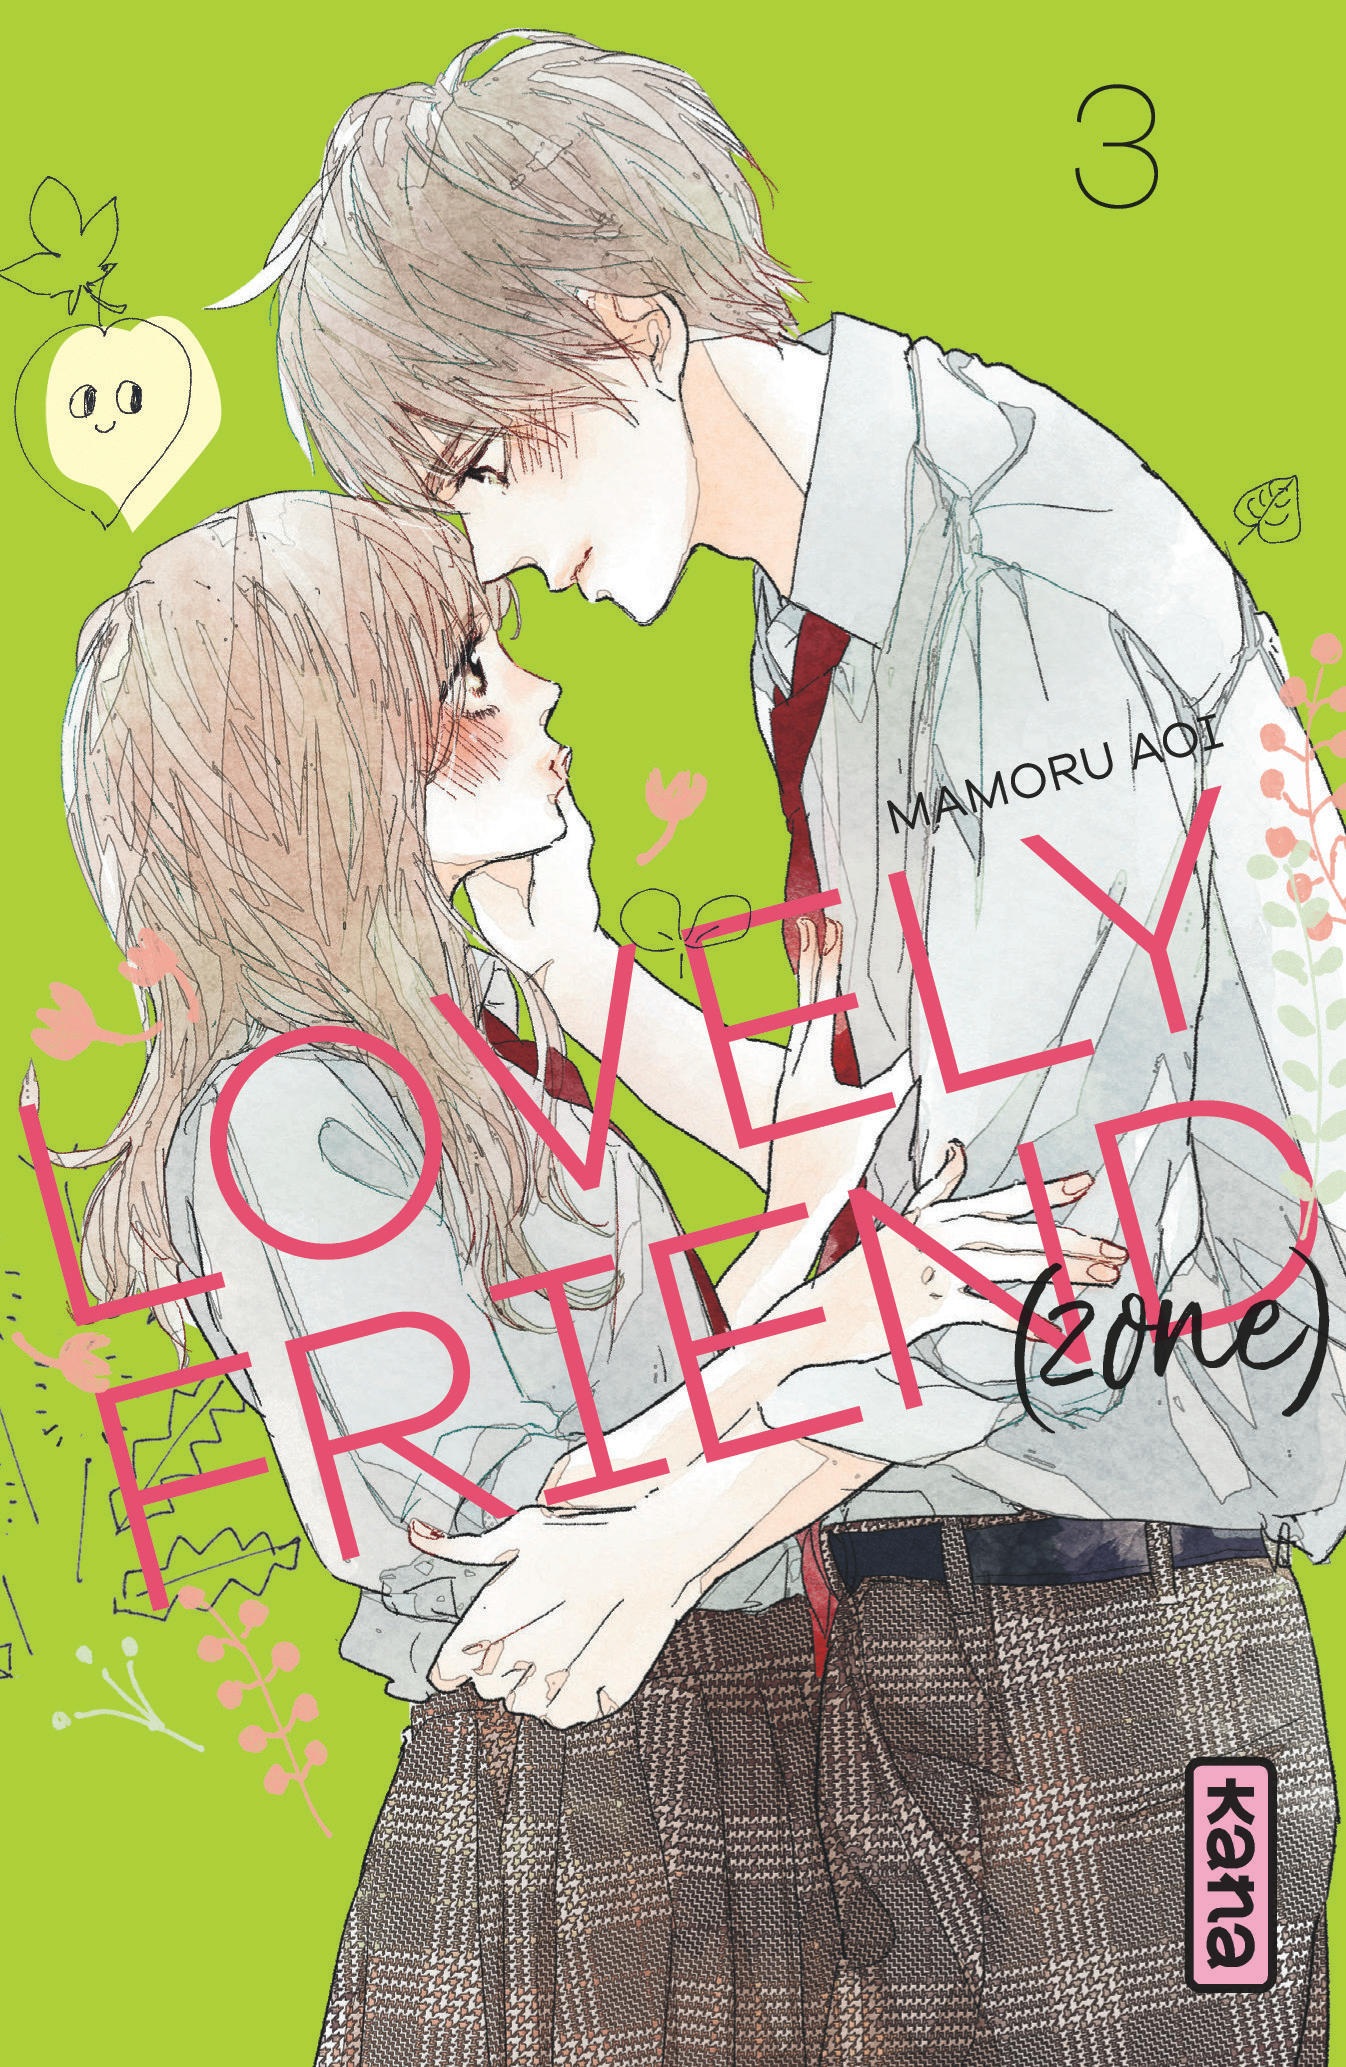 Lovely Friend(zone) – Tome 3 - couv